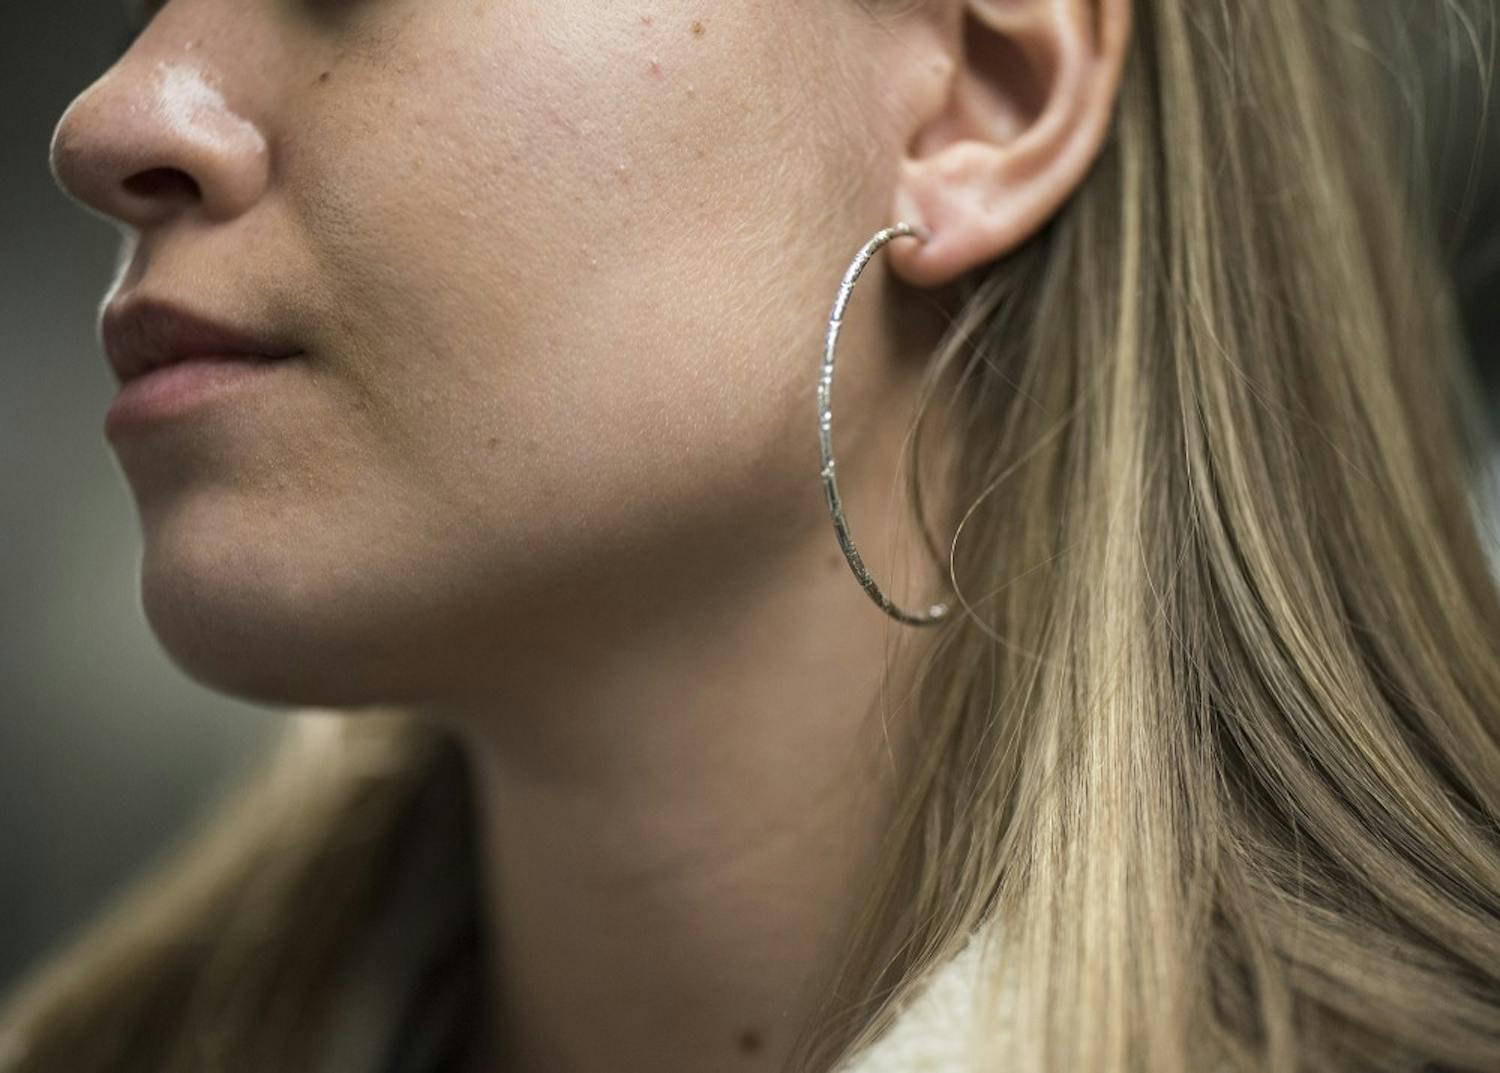 According to columnist Katie Chrisco, hoop earrings are a new Black Friday trend. Other Black Friday trends include embroidered boots and fur jackets.&nbsp;